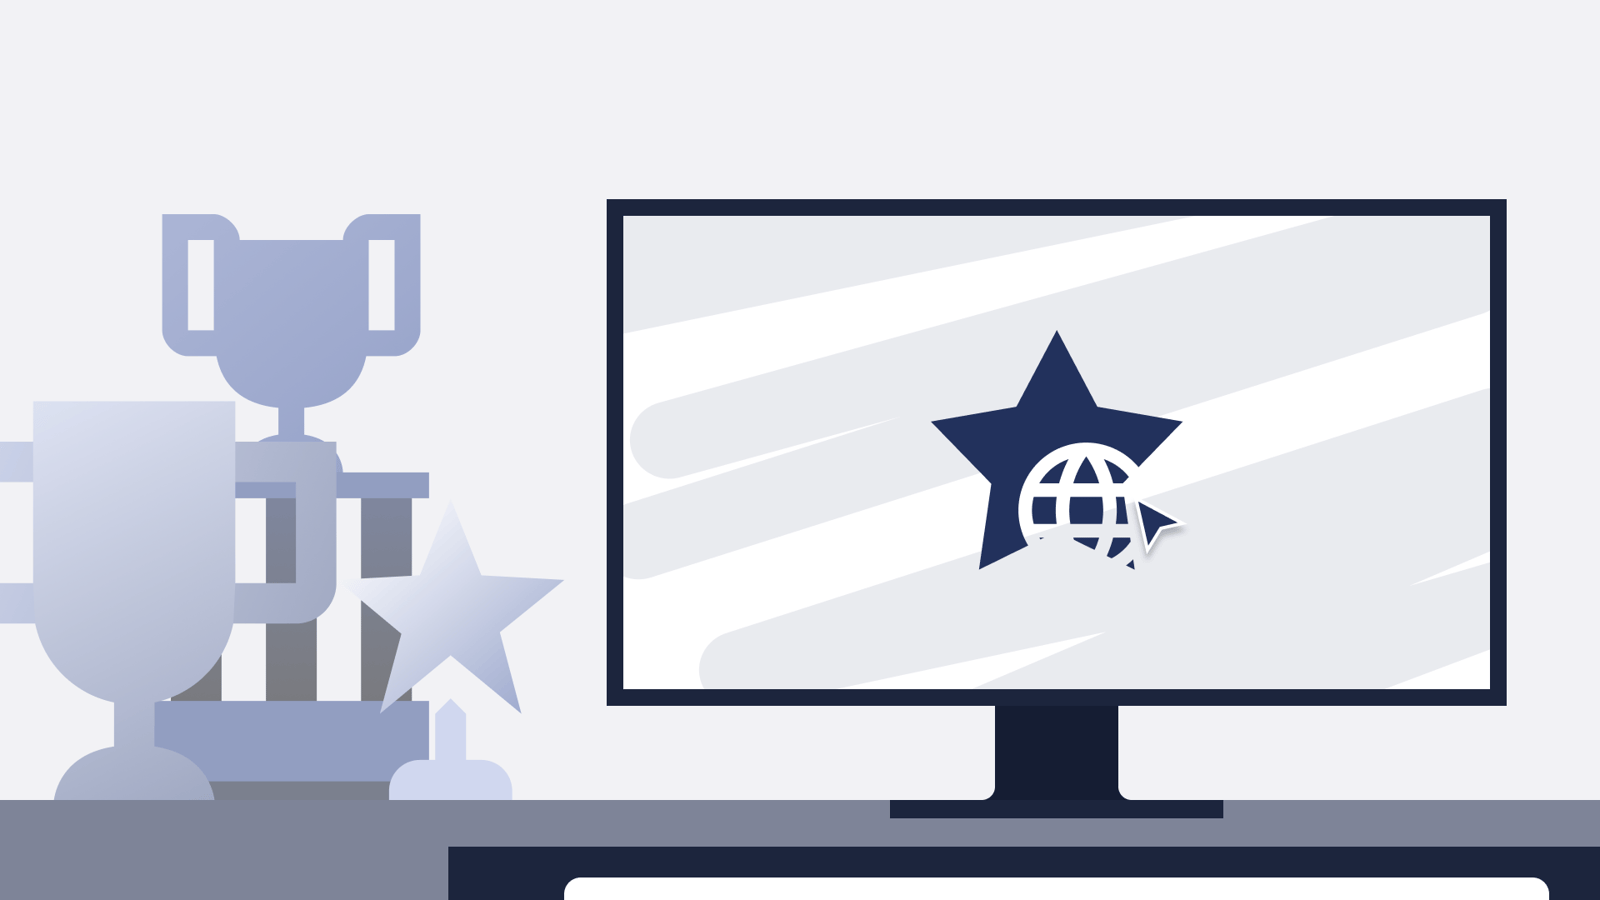 Culture Stars: A New Way to Publicly Recognize Your Star Employees